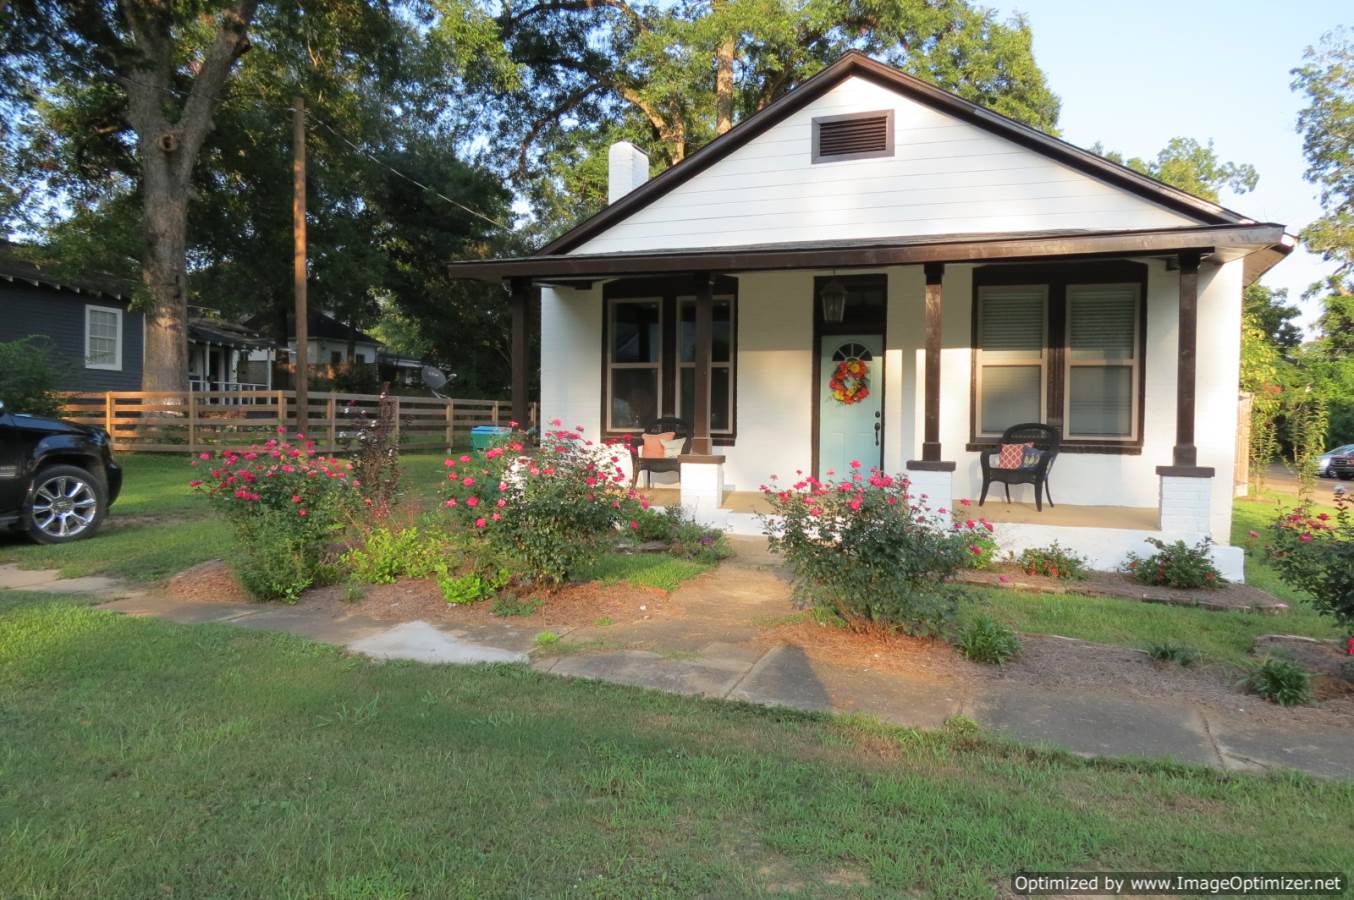 lincoln-county-ms-home-for-sale